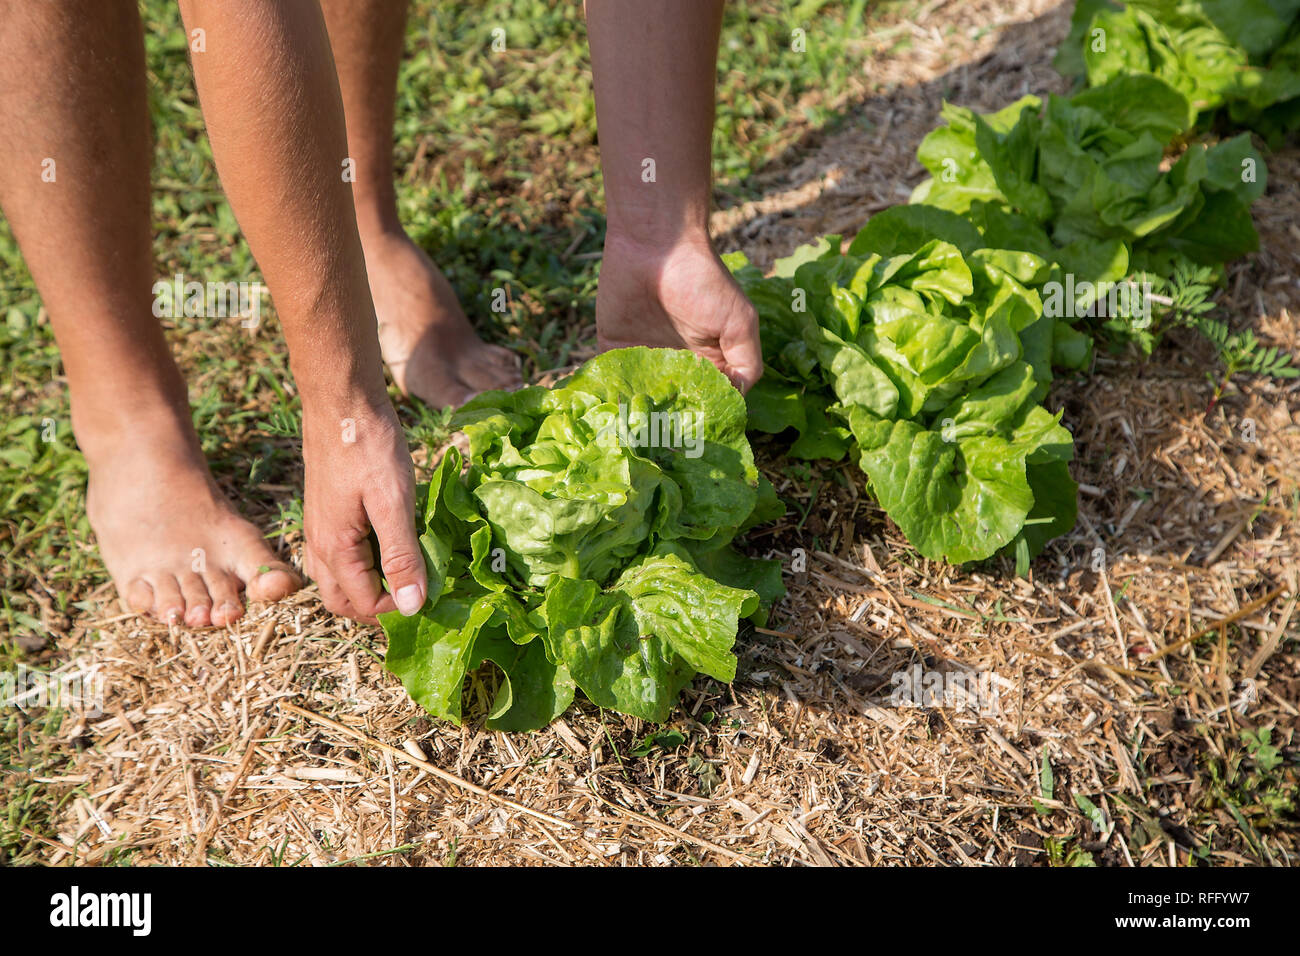 Young man Working in a Home Grown Vegetable Garden Stock Photo